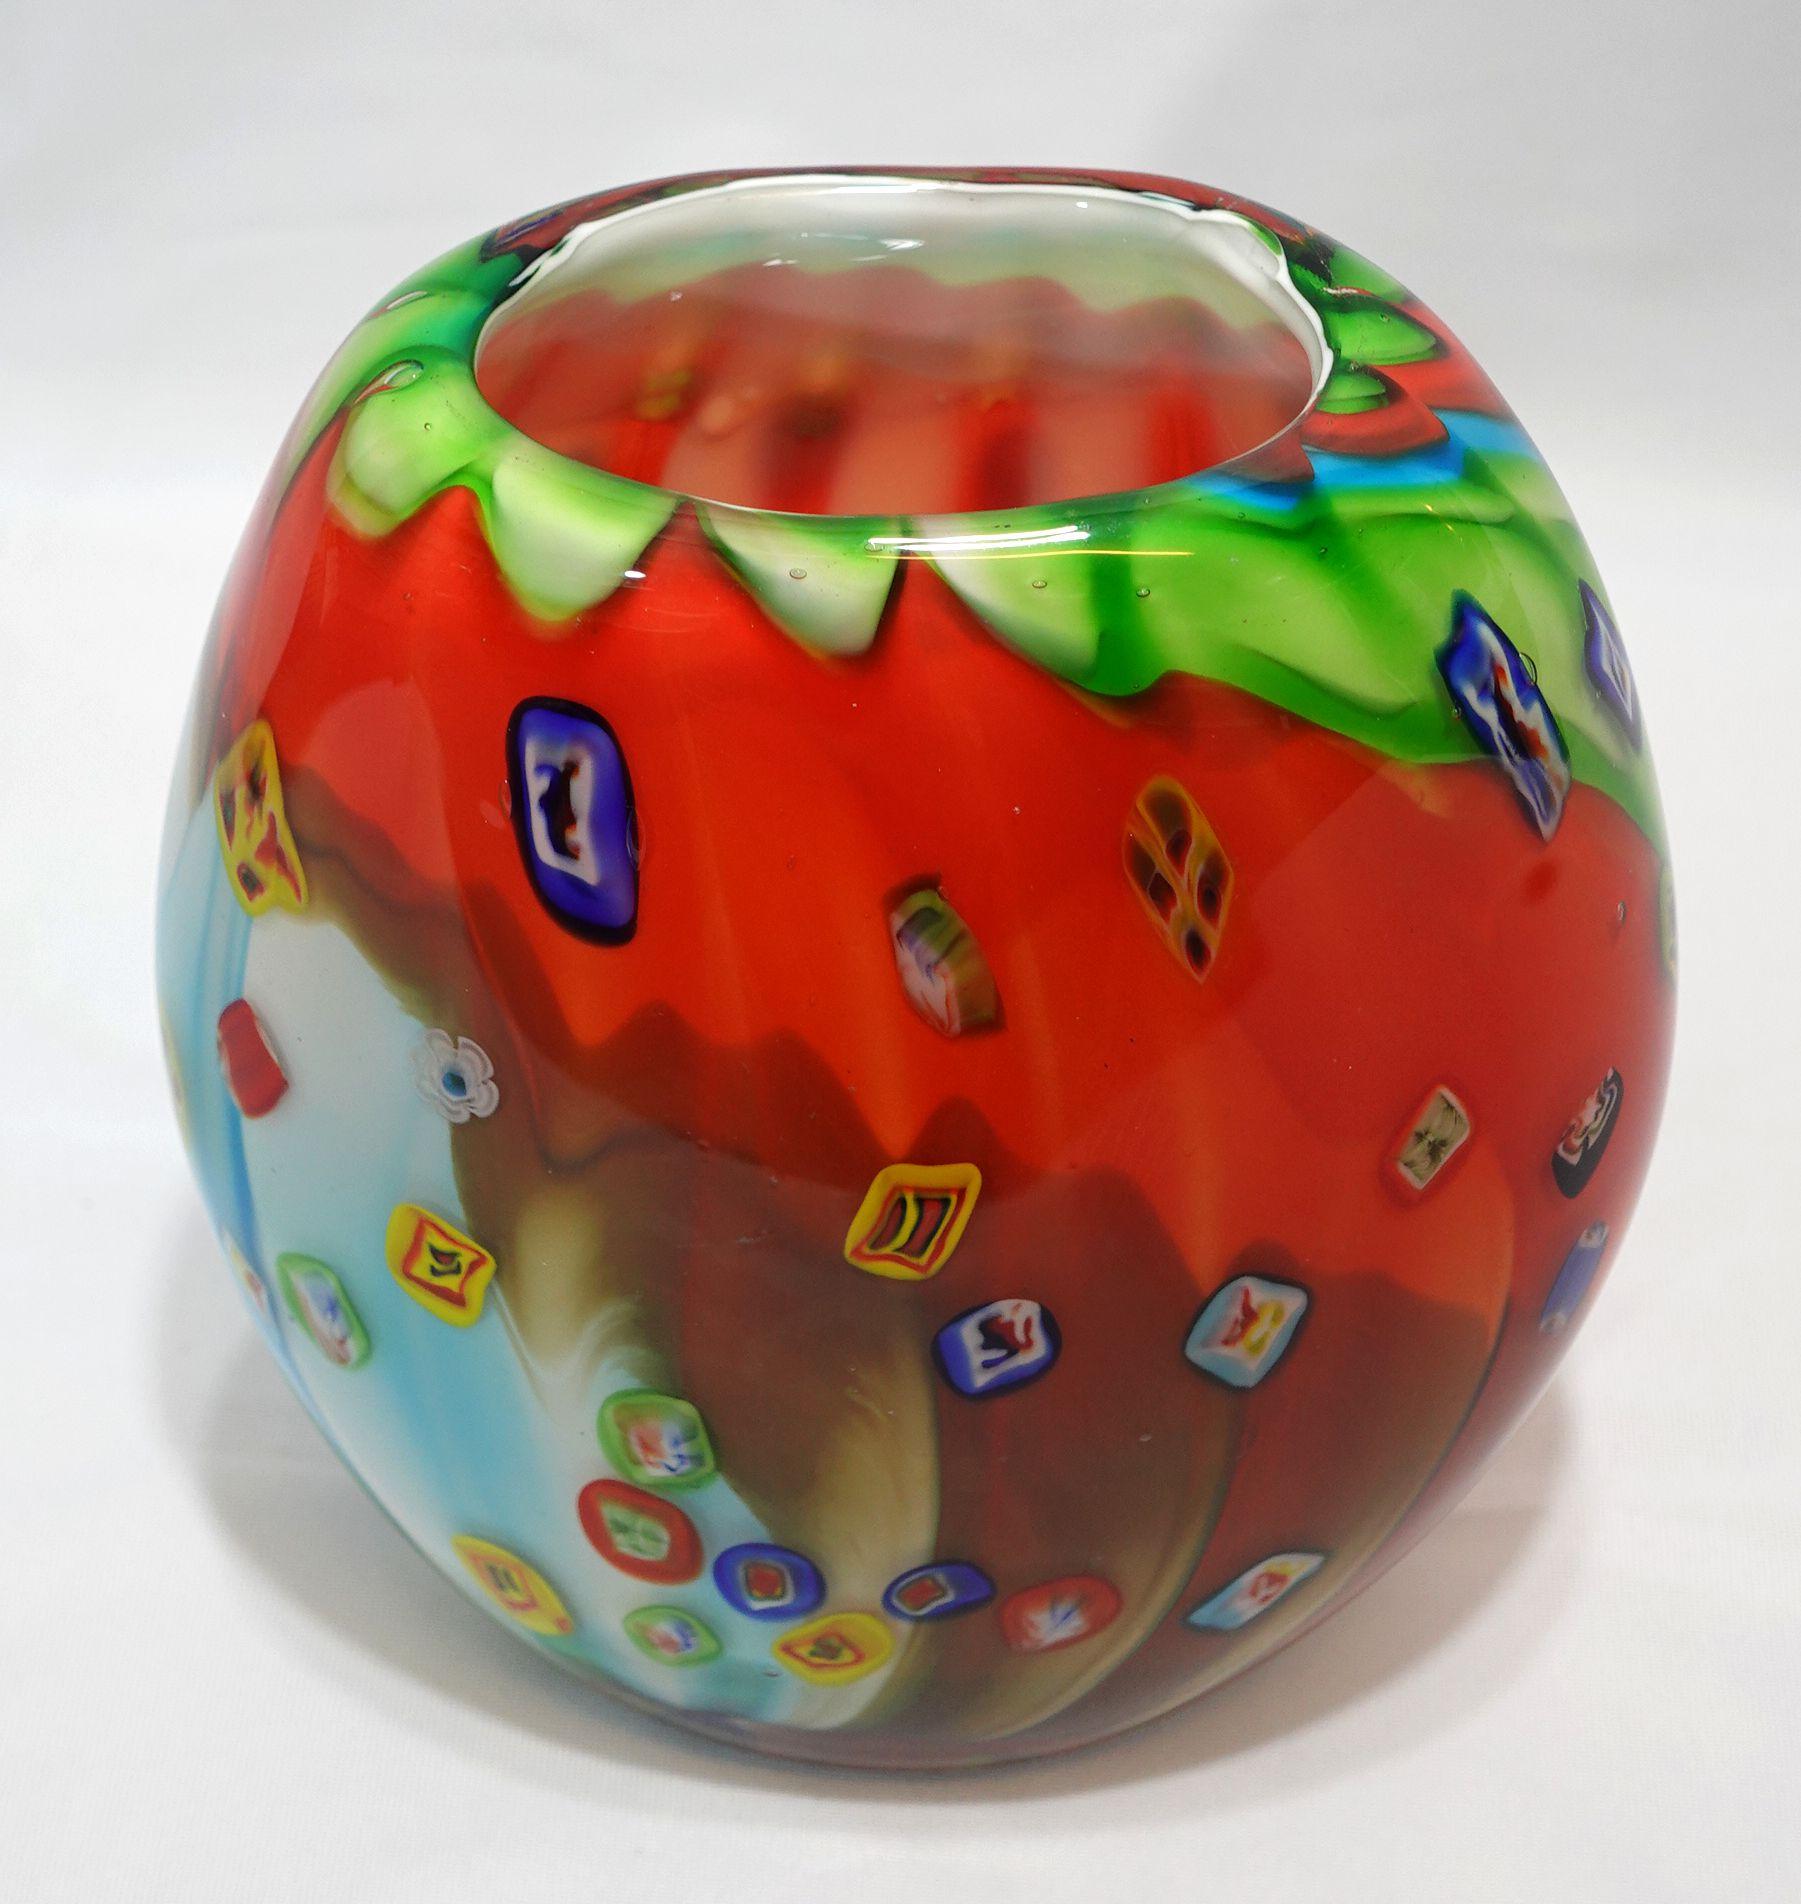 A Large and Heavy Murano Hand Blown Murrine Glass Vase, colorful artwork.